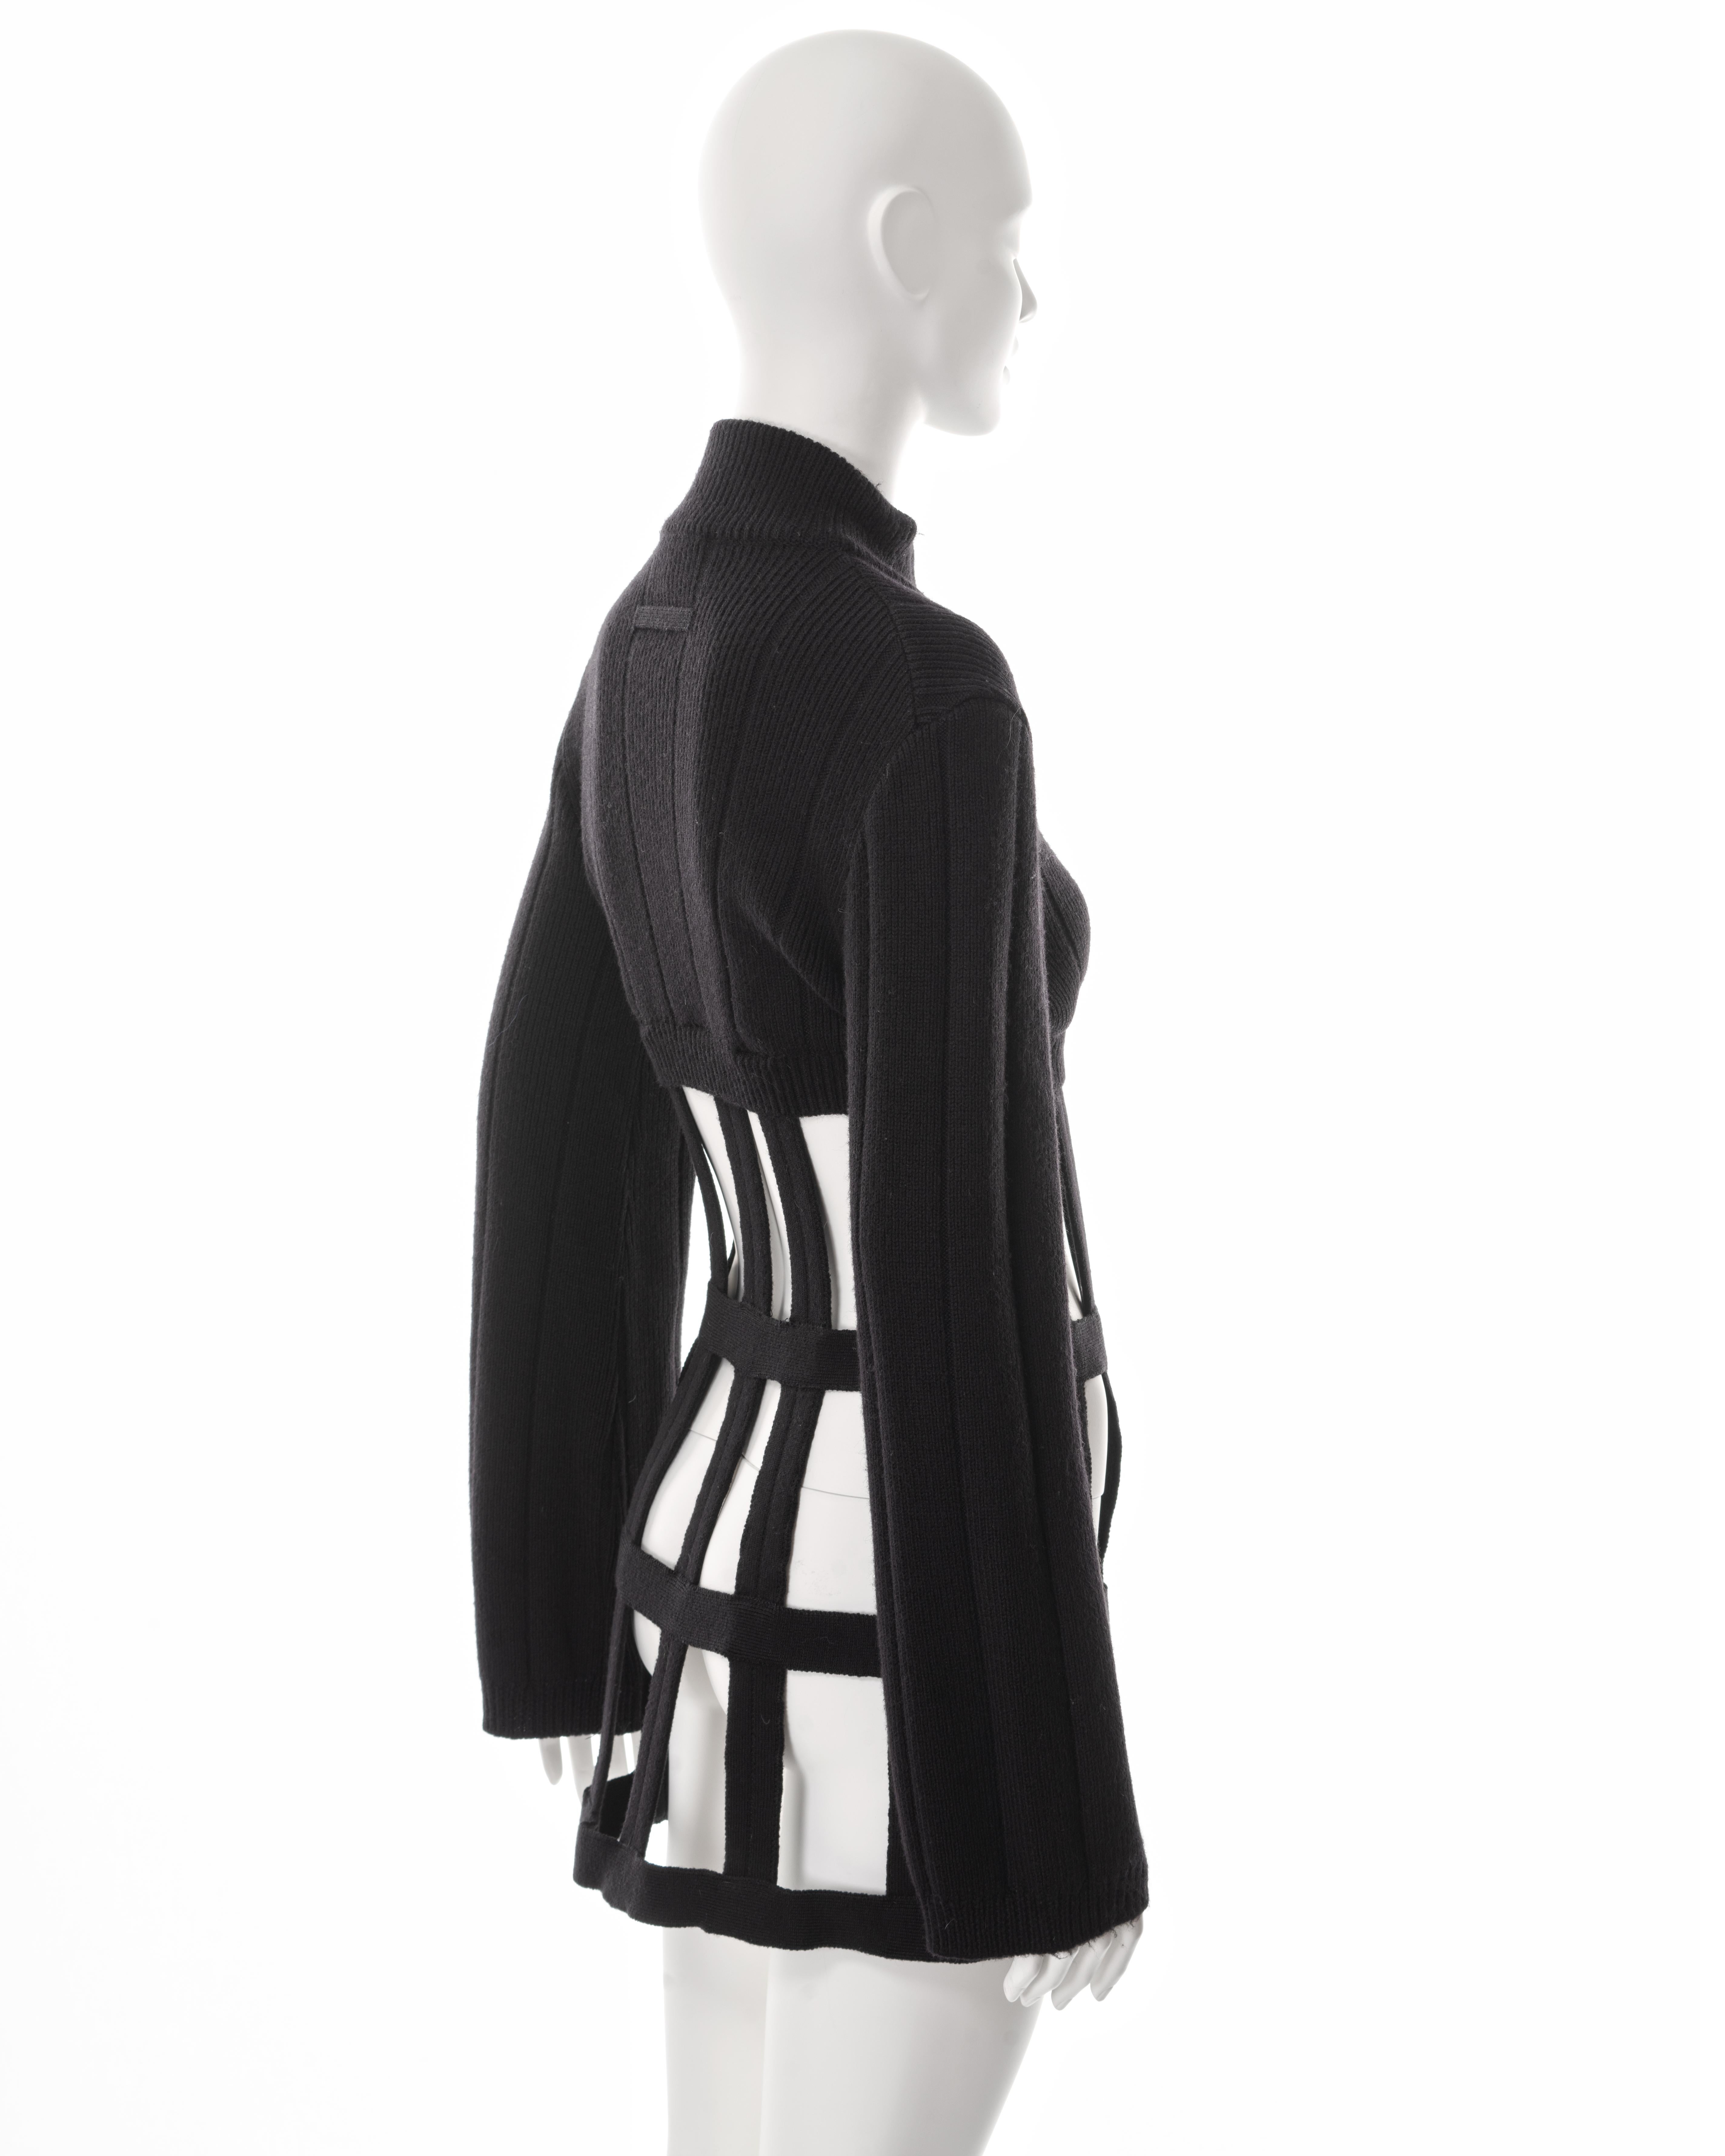 Jean Paul Gaultier black knitted wool caged corset sweater dress, fw 1989 For Sale 4